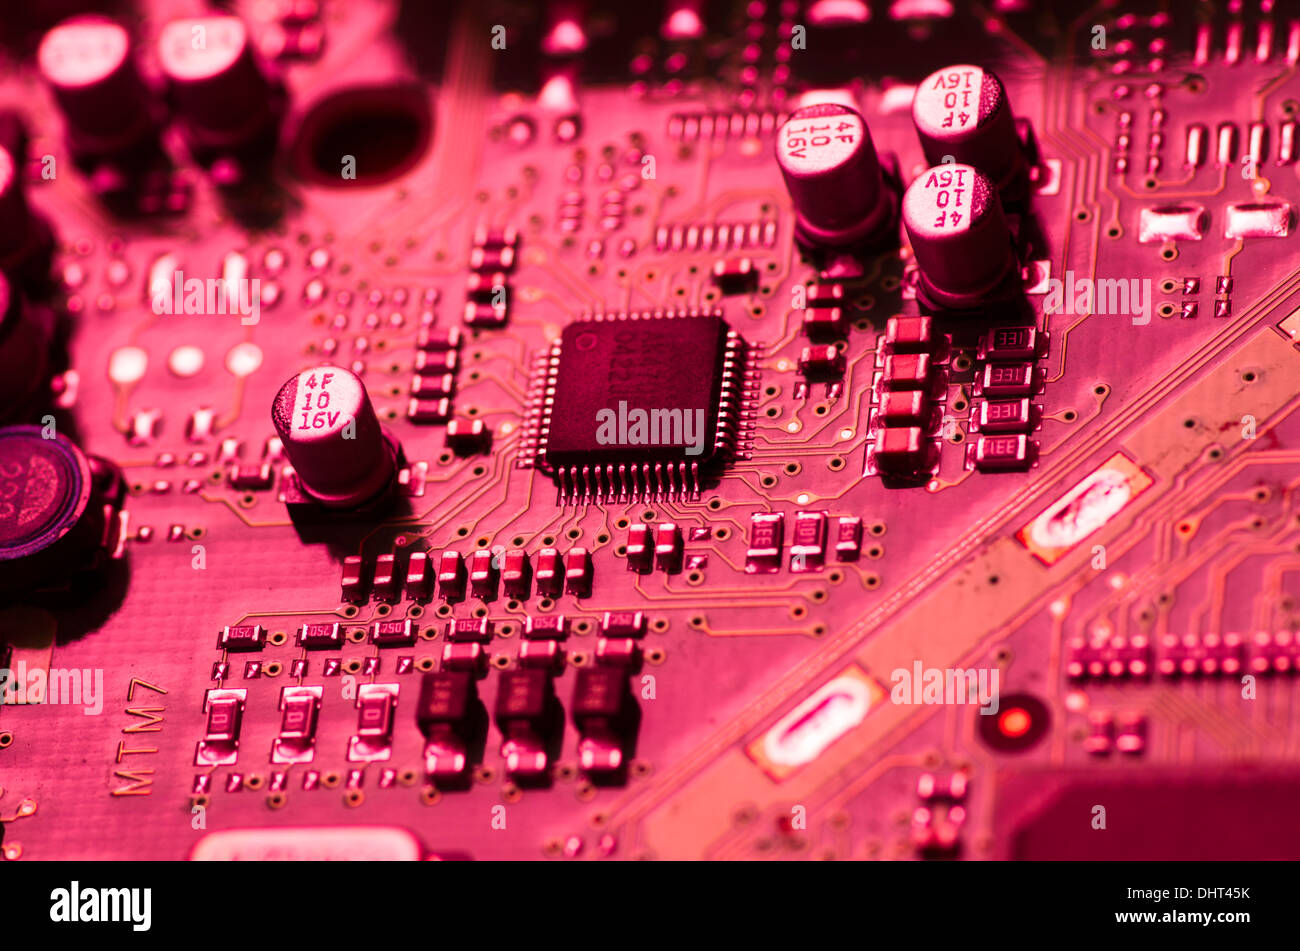 Printed circuit board in red light. Stock Photo